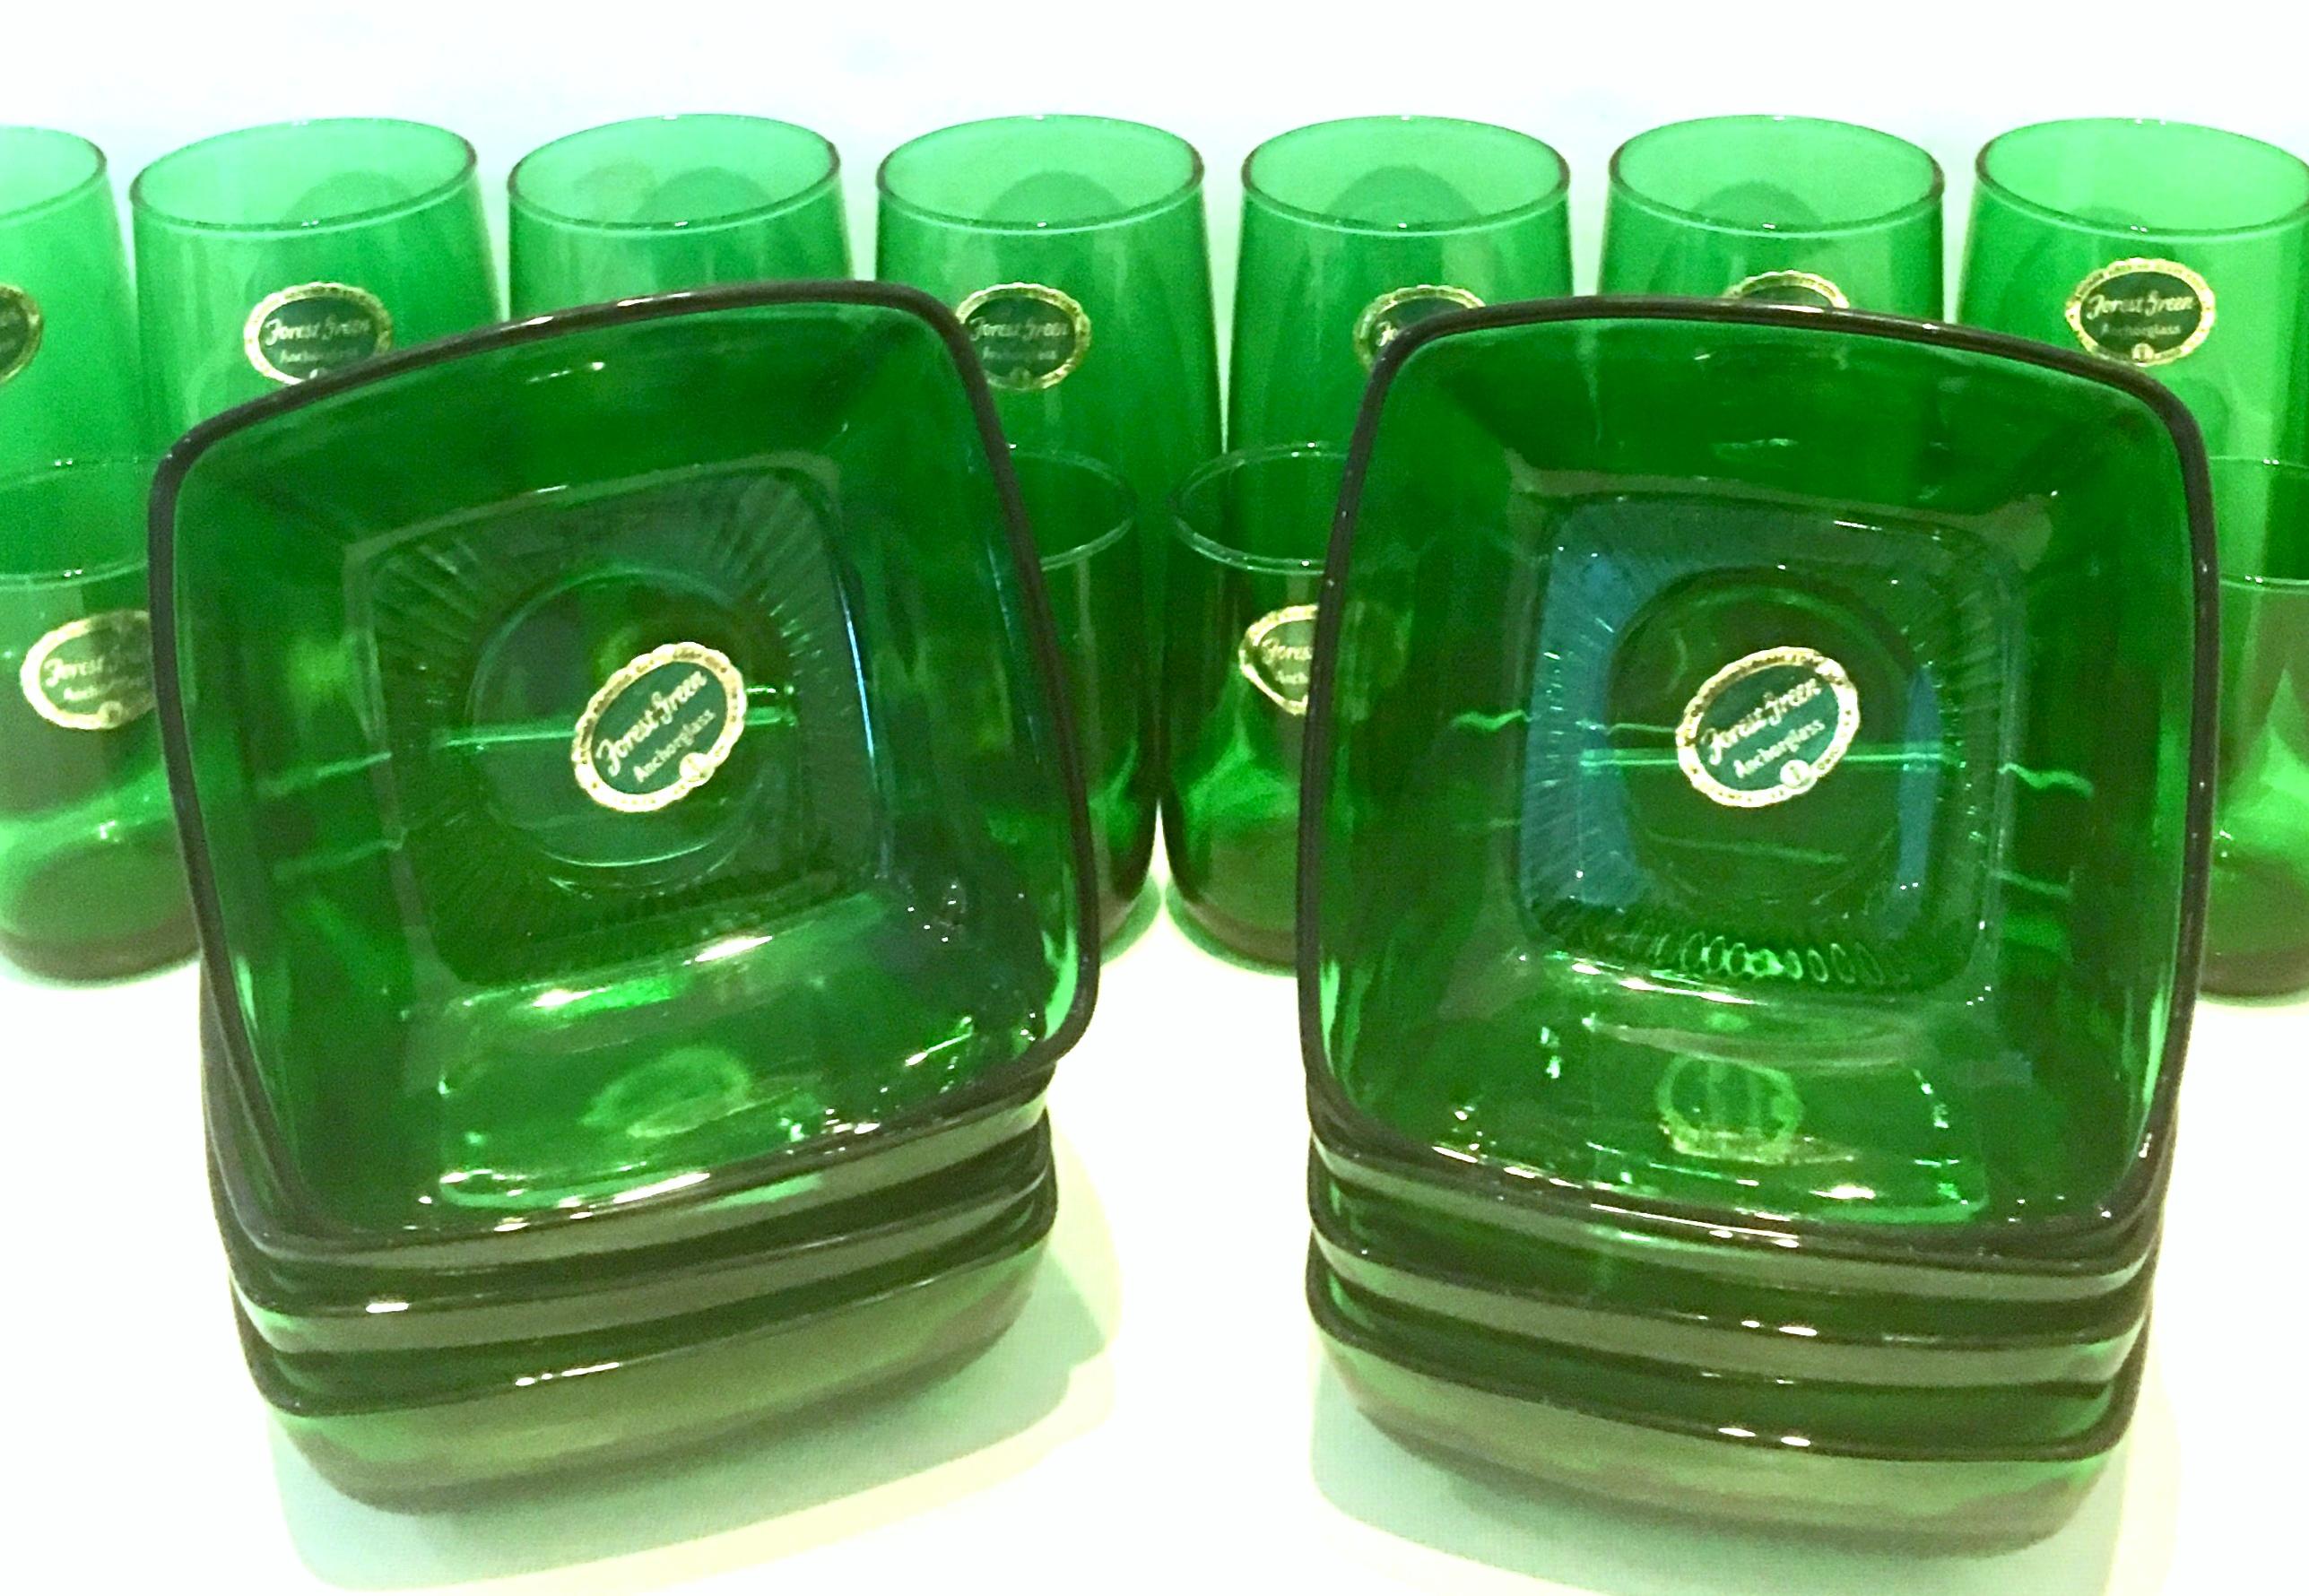 Mid-20th century and new blown glass drink glass and square bowl set of twenty four pieces by, Anchor Hocking Glass Corp. This emerald green blown glass drink glass and bowl set includes, eight large tumbler drink glasses, eight small tumbler drink